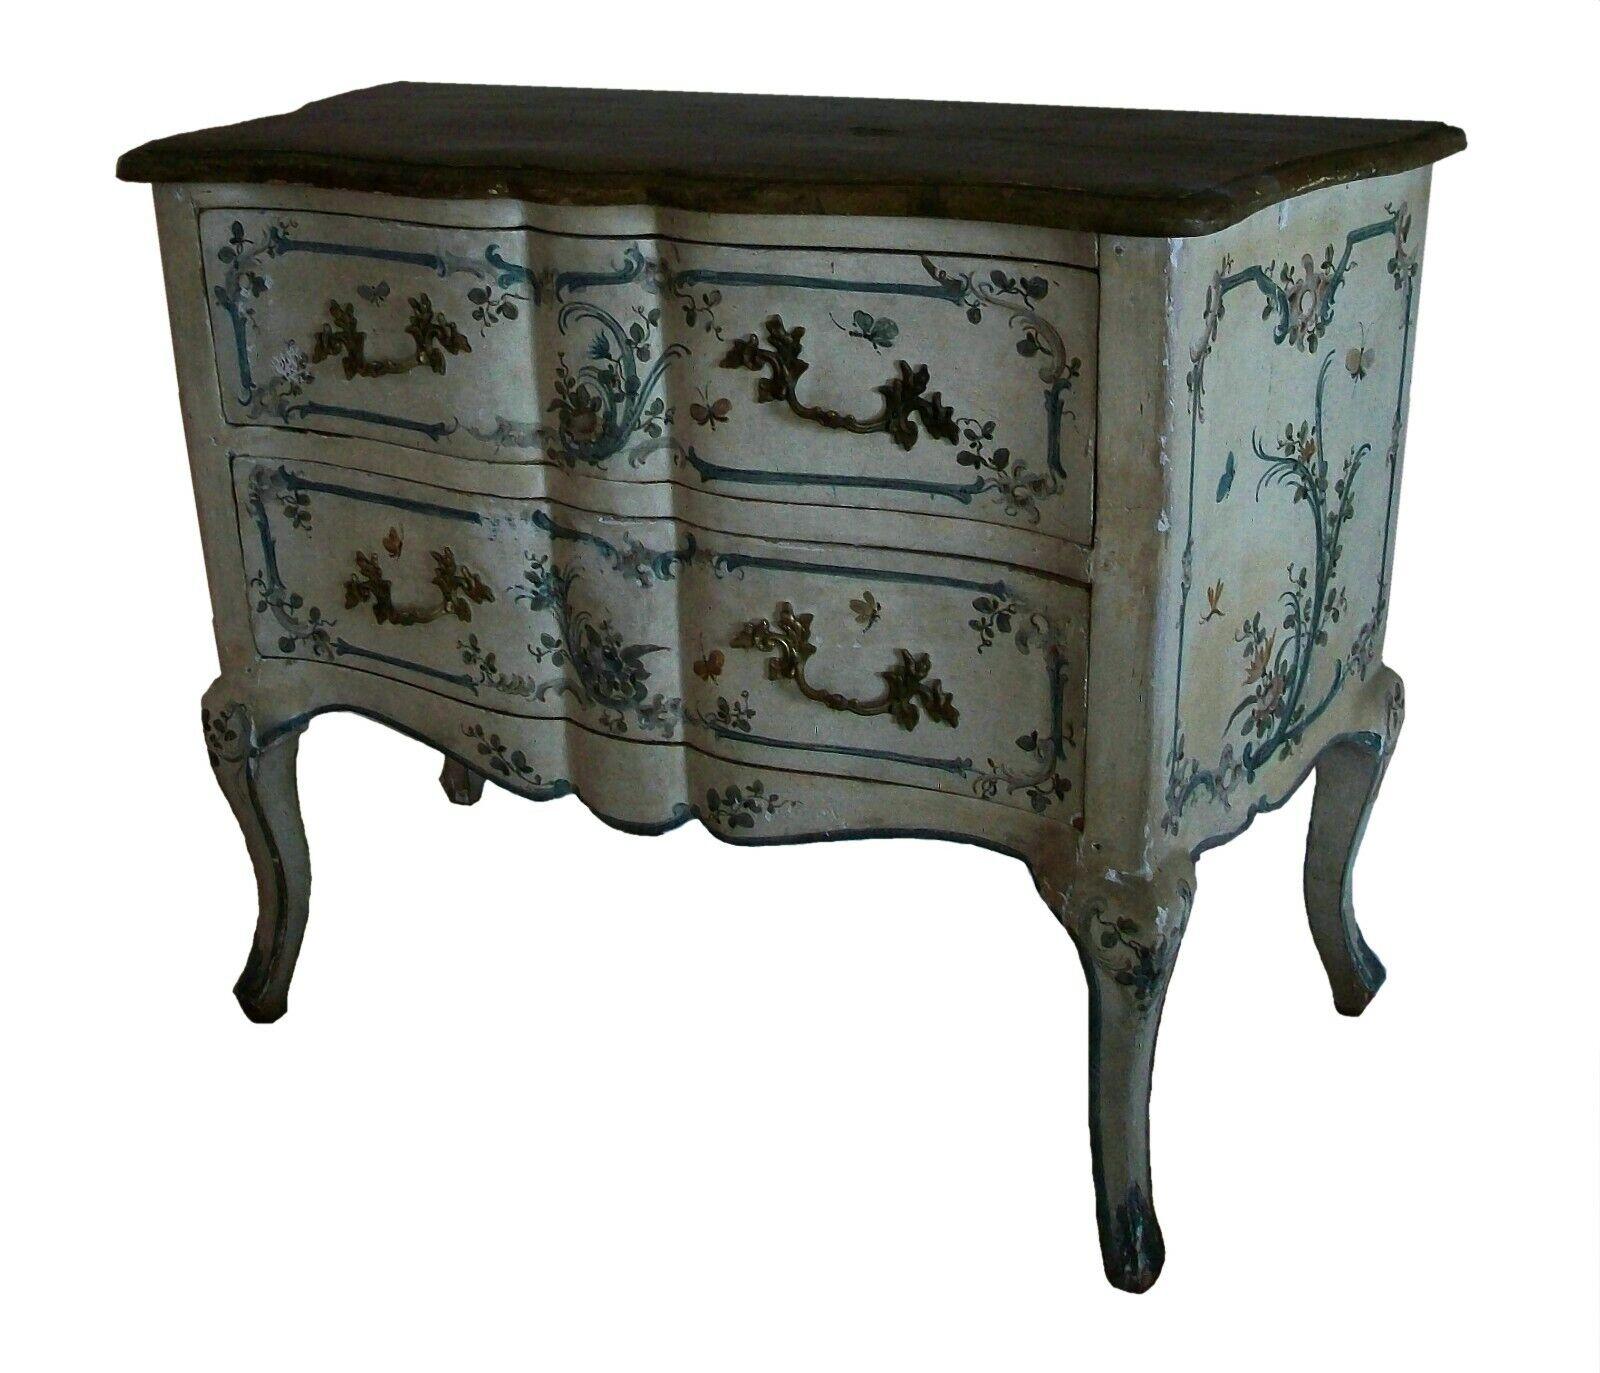 Antique Italian Rococo polychrome painted chest of drawers with faux marble top - hand painted in cream and blue with scrolls, flowers and butterflies - solid pine wood construction throughout with doweled joints and tongue and groove drawer fronts